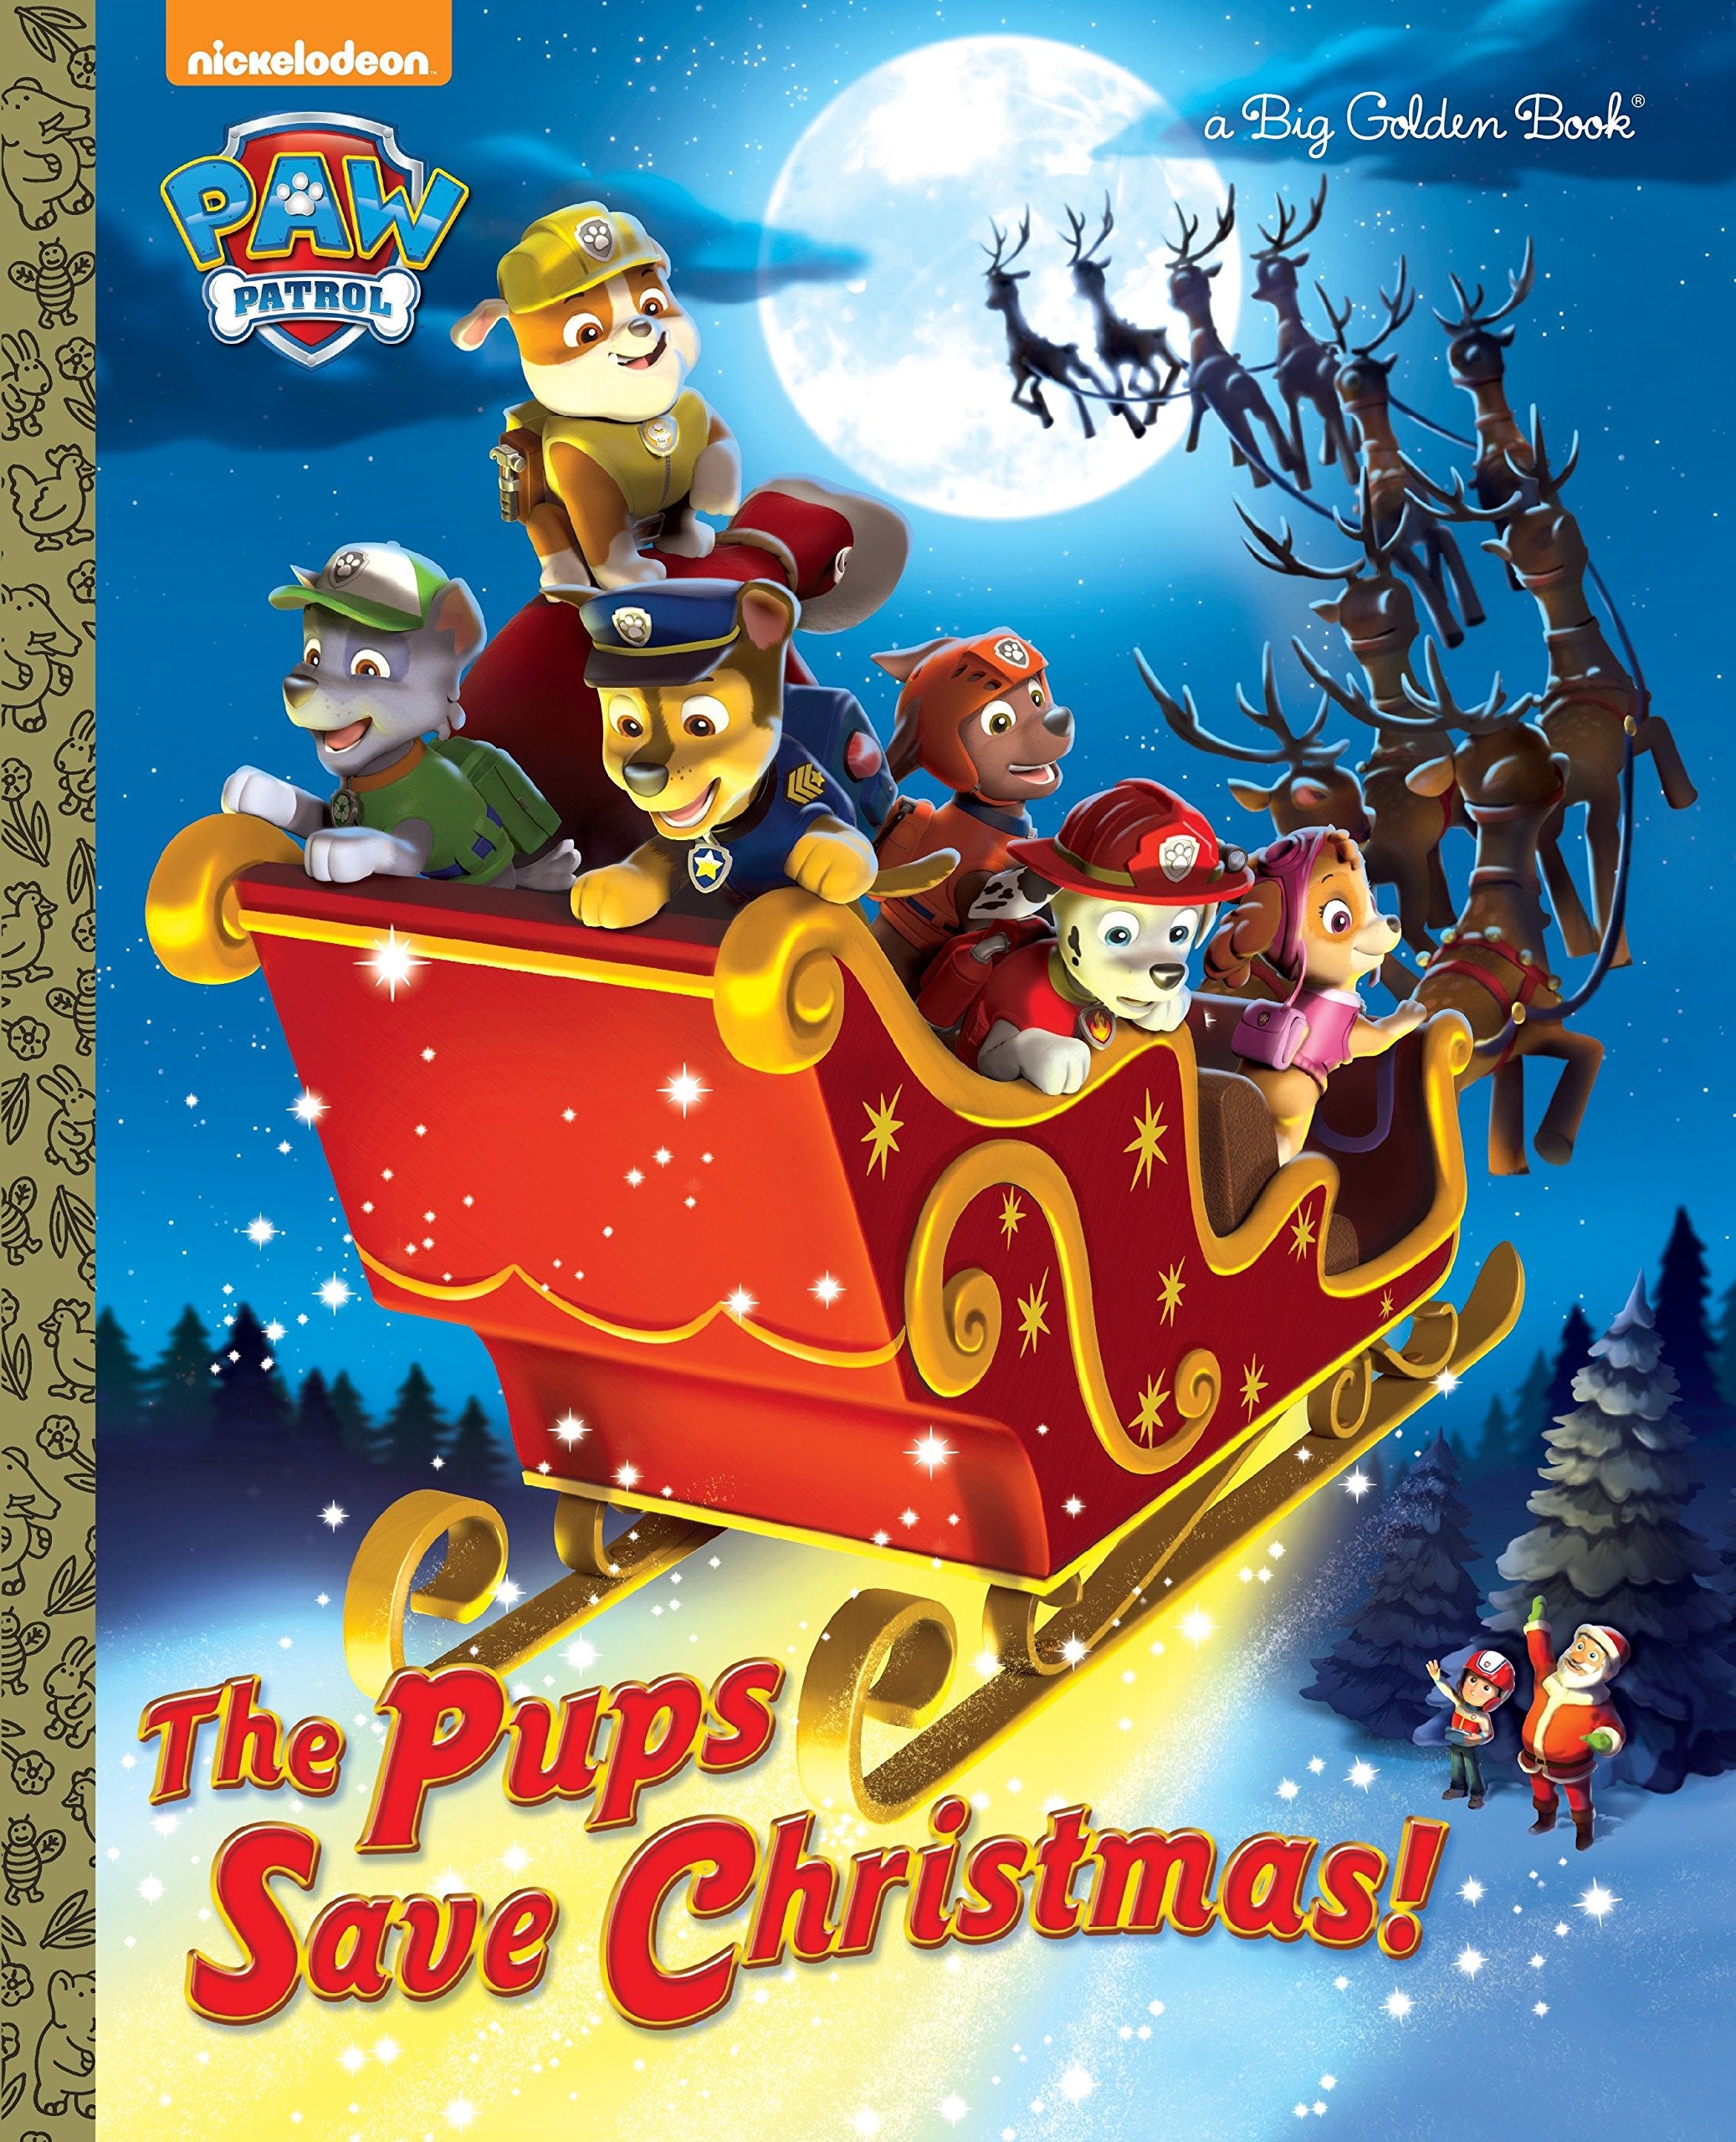 The Pups Save Christmas! (Paw Patrol) Hardcover by Golden Books (Author), Harry Moore (Illustrator)